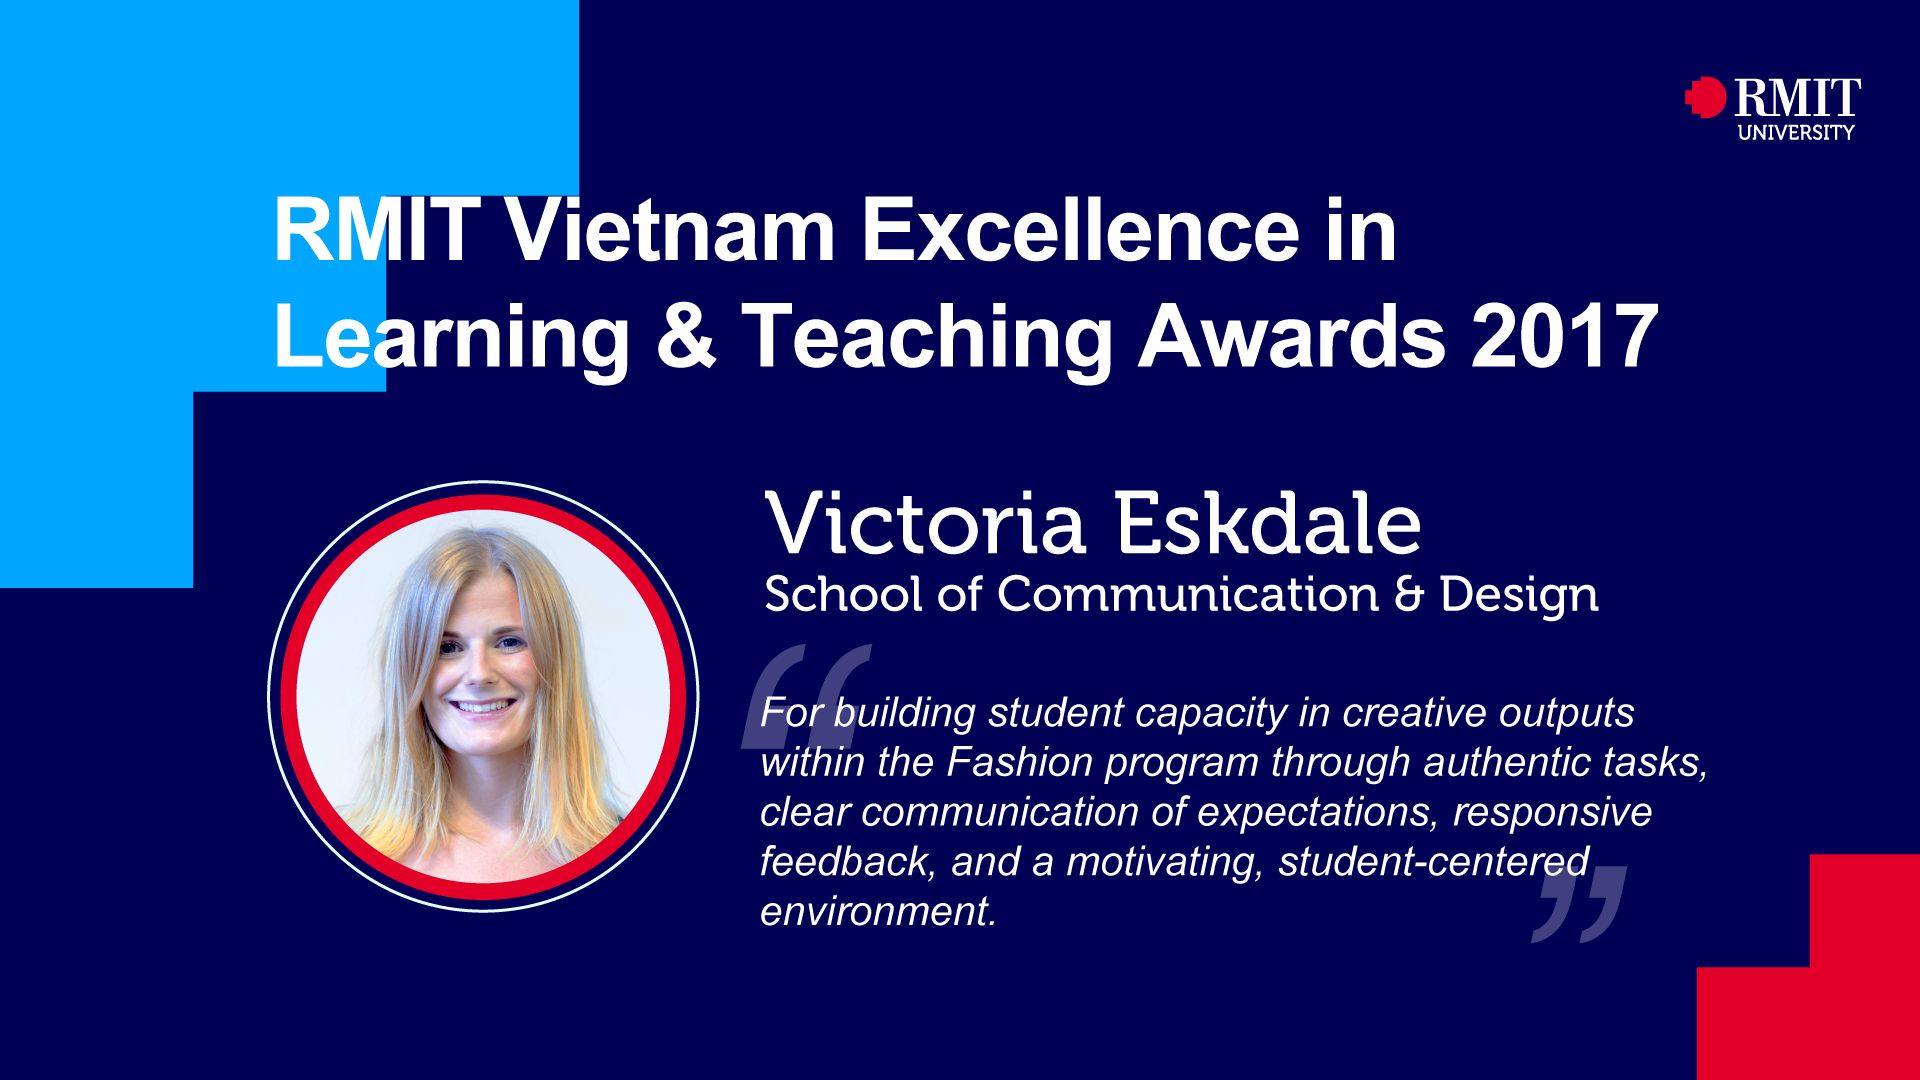 Teachers awarded for creating transcendent learning experiences